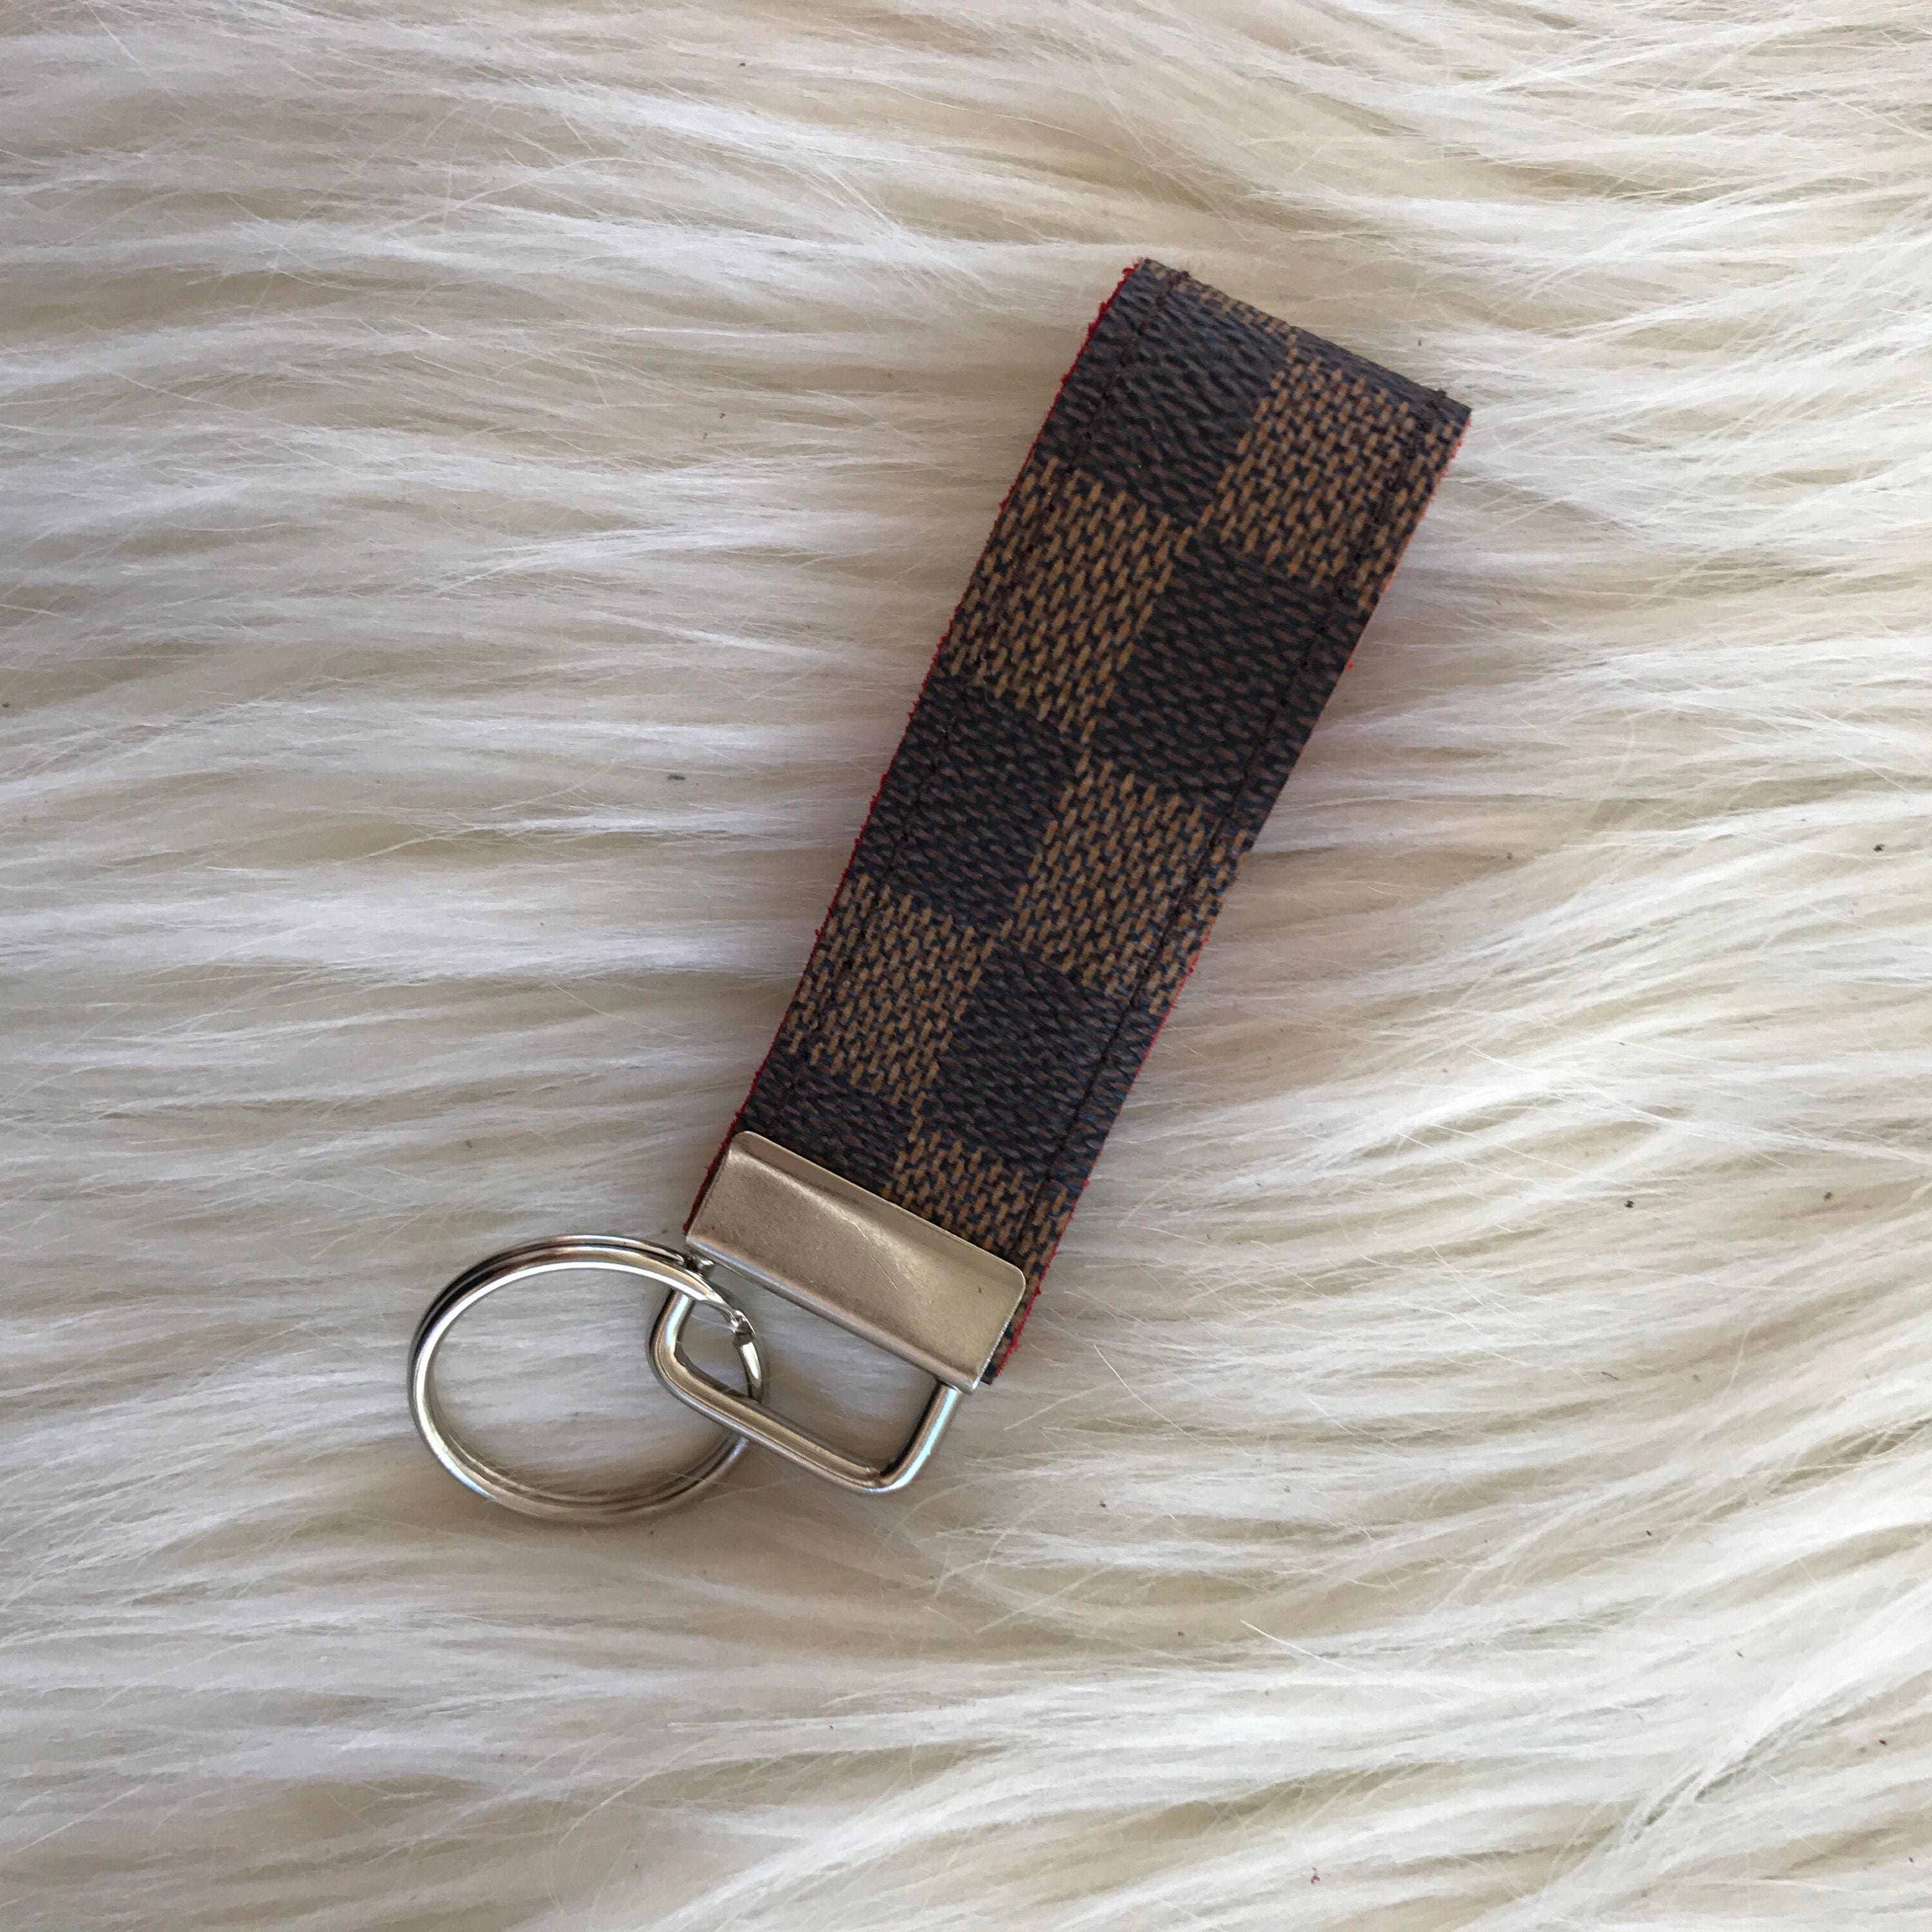 Upcycled Louis Vuitton Keyfob in Damier Ebene